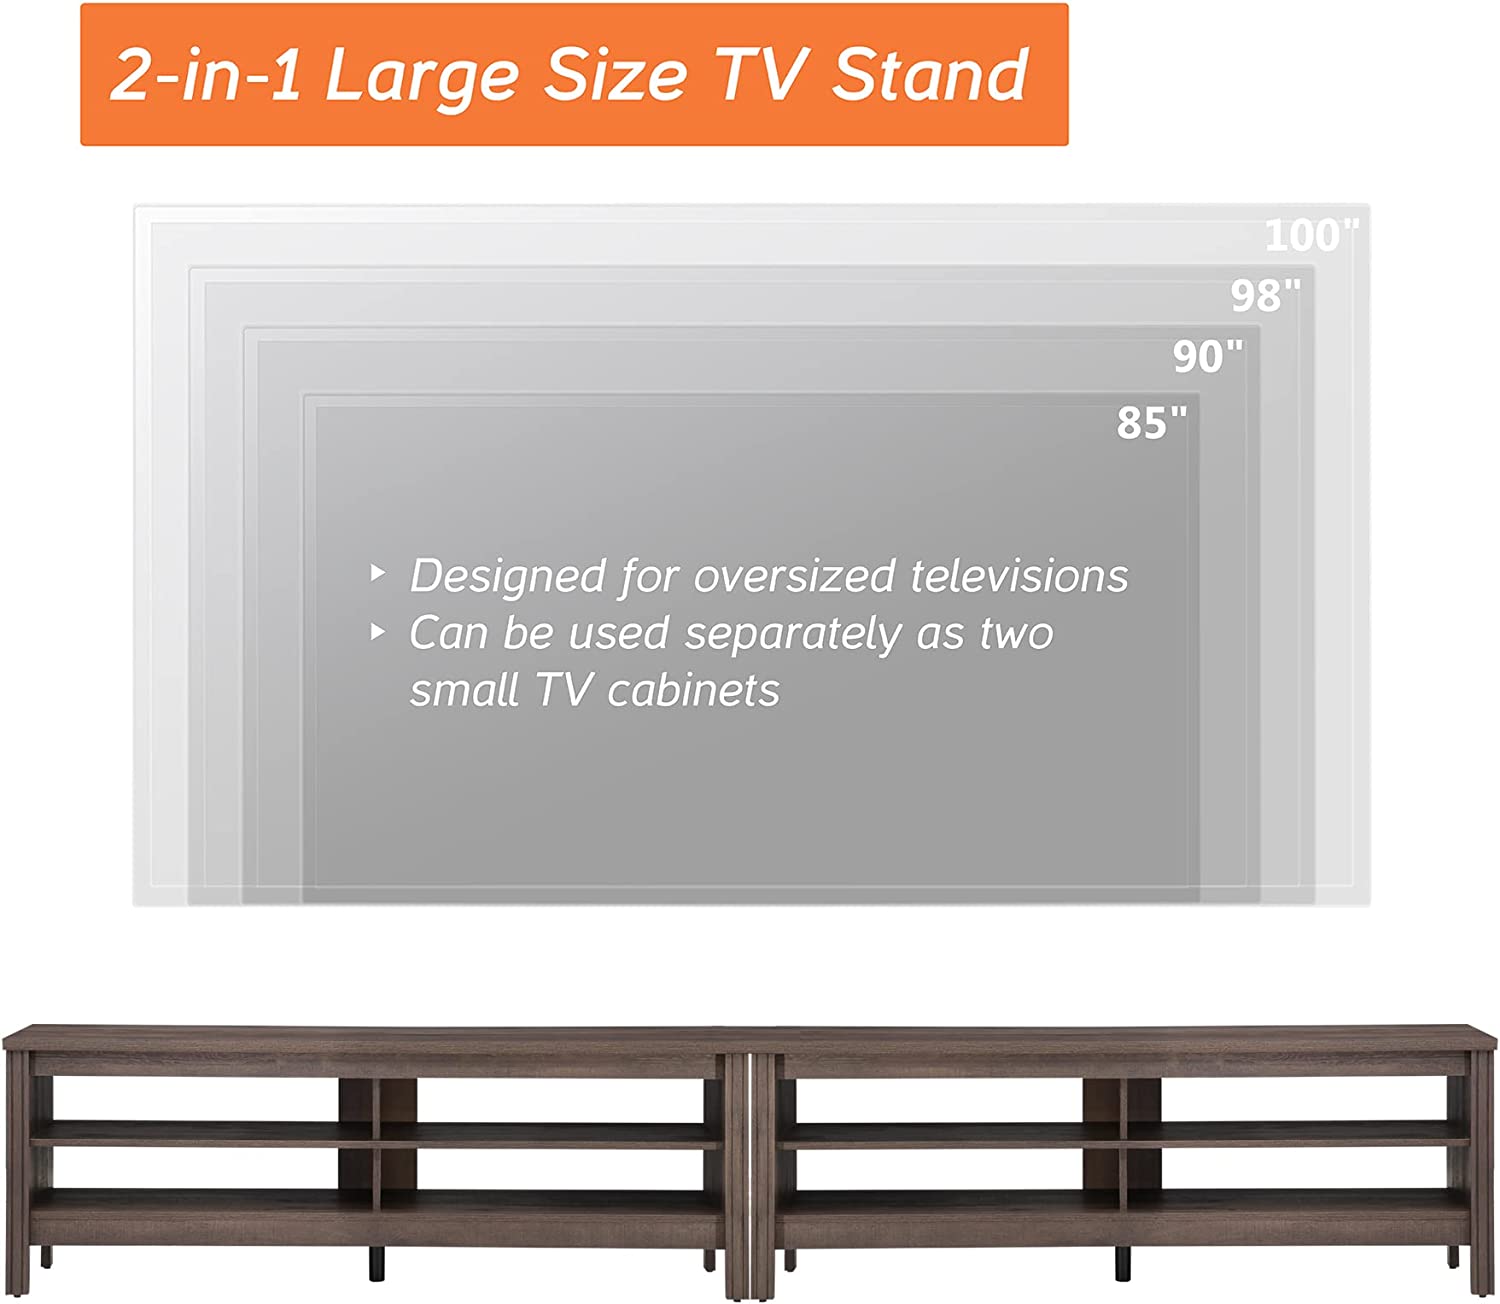 WAMPAT 118" TV Stand for 80 85 90 100 Inch TV, Entertainment Center for Living Room Bedroom, Espresso